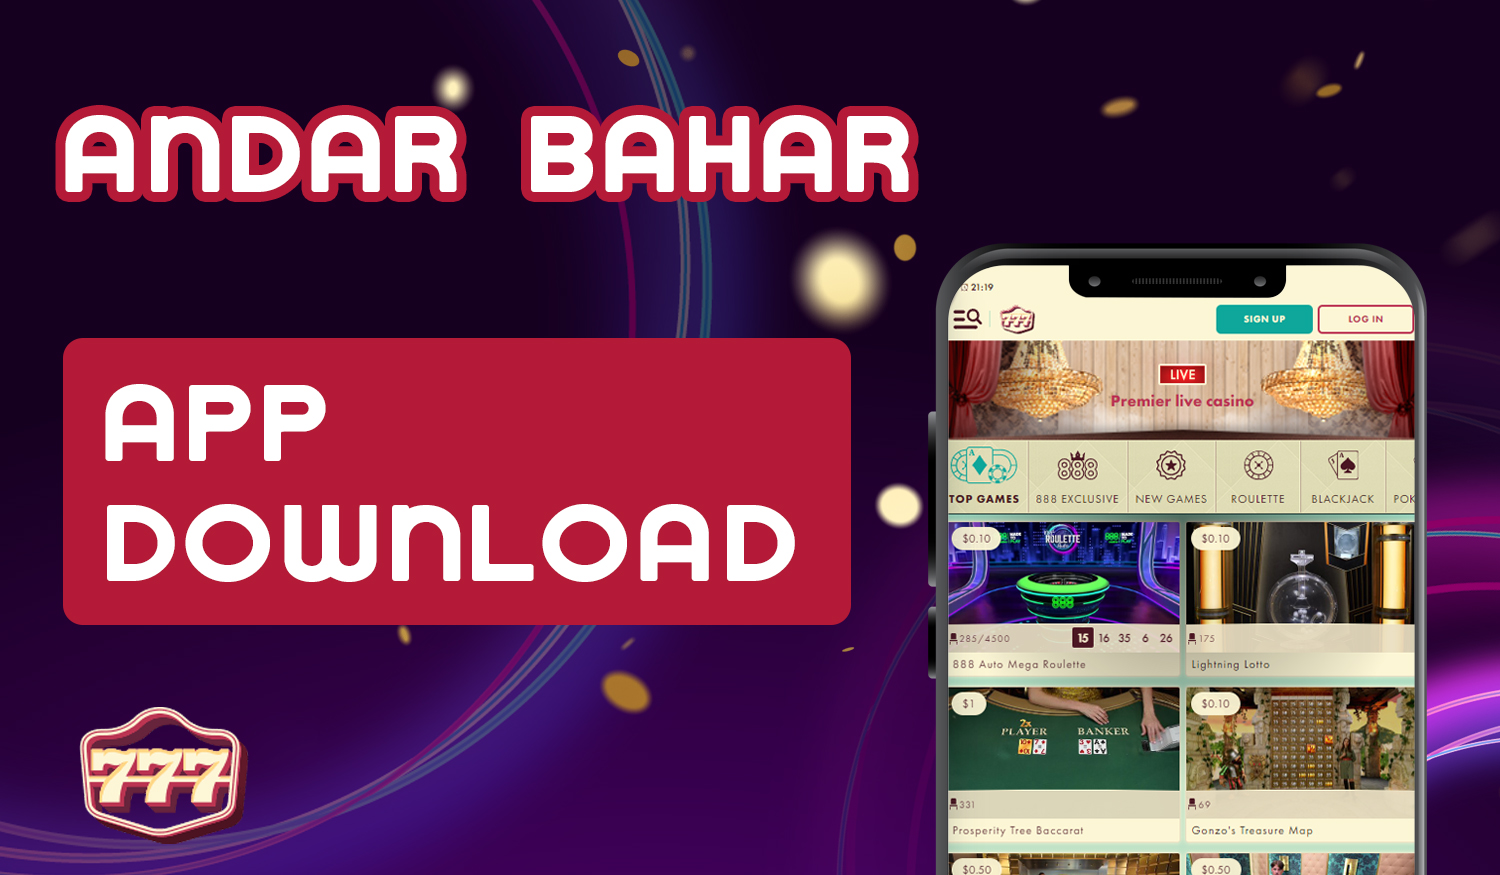 How to start playing Andar Bahar at 777 Casino using the mobile app